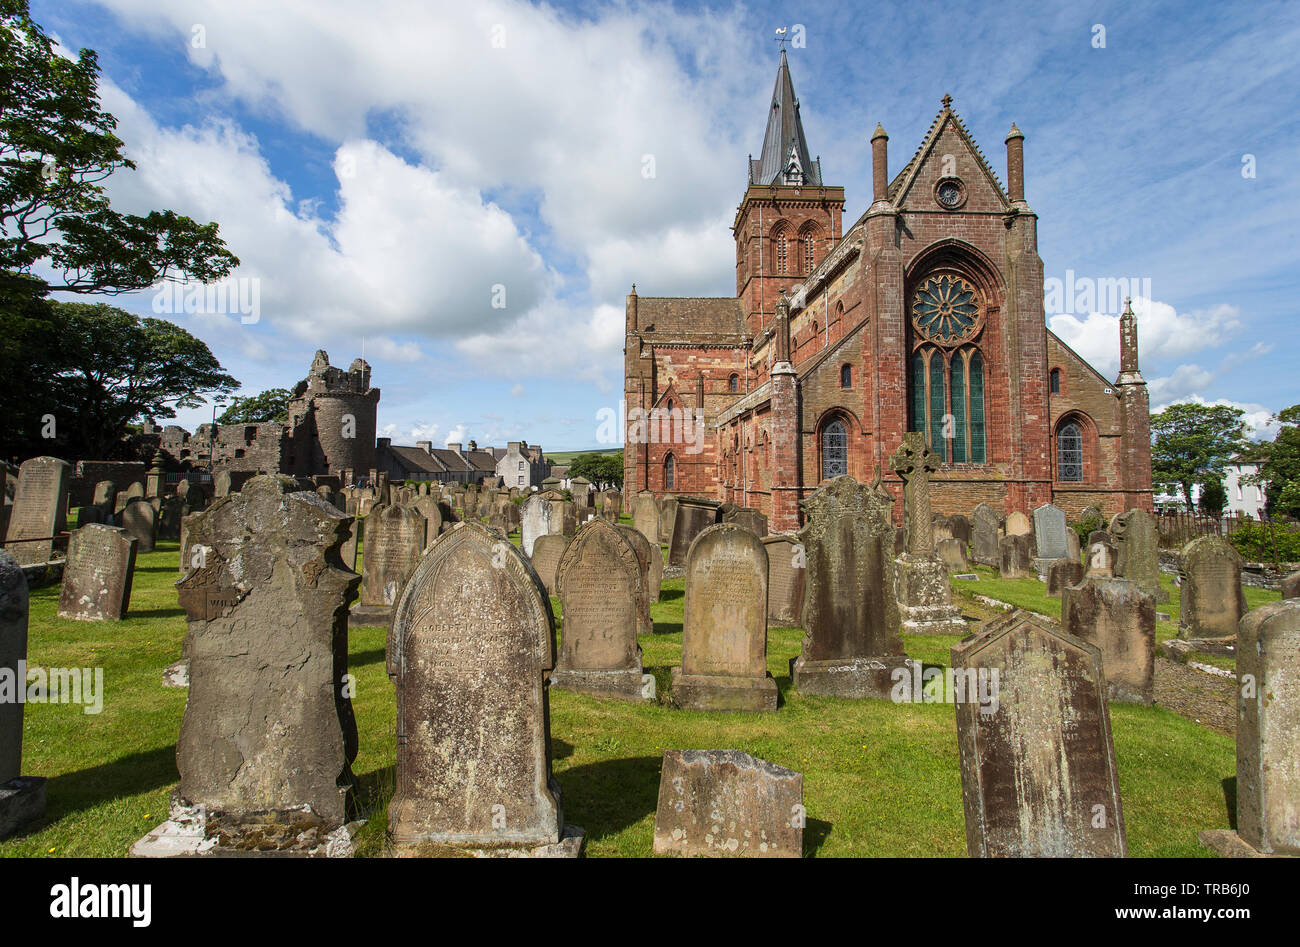 Image shows the St. Magnus Cathedral in Kirkwall, Orkney Island Stock Photo